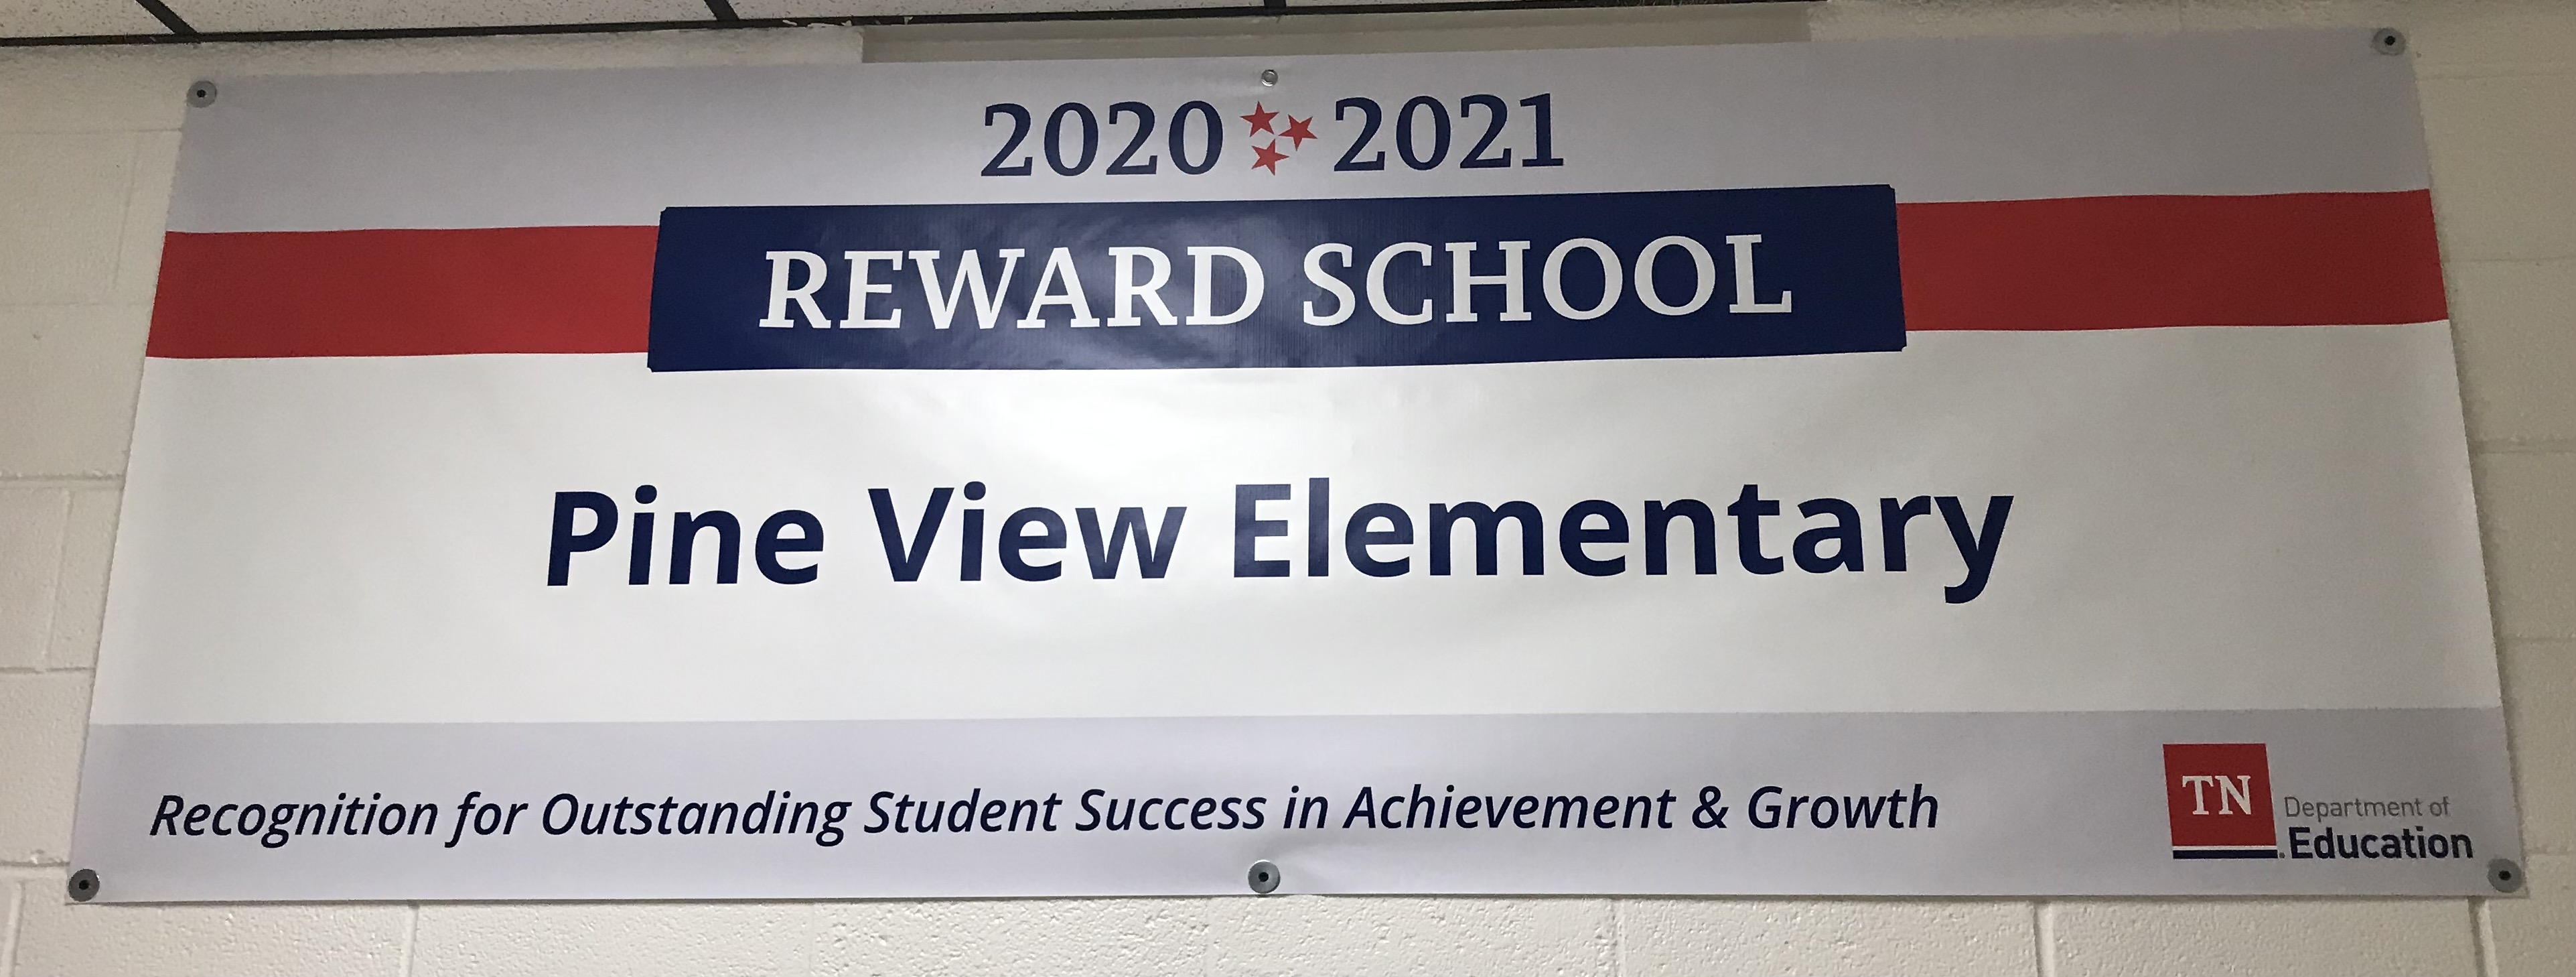 banner stating we are a reward school for 2020-2021